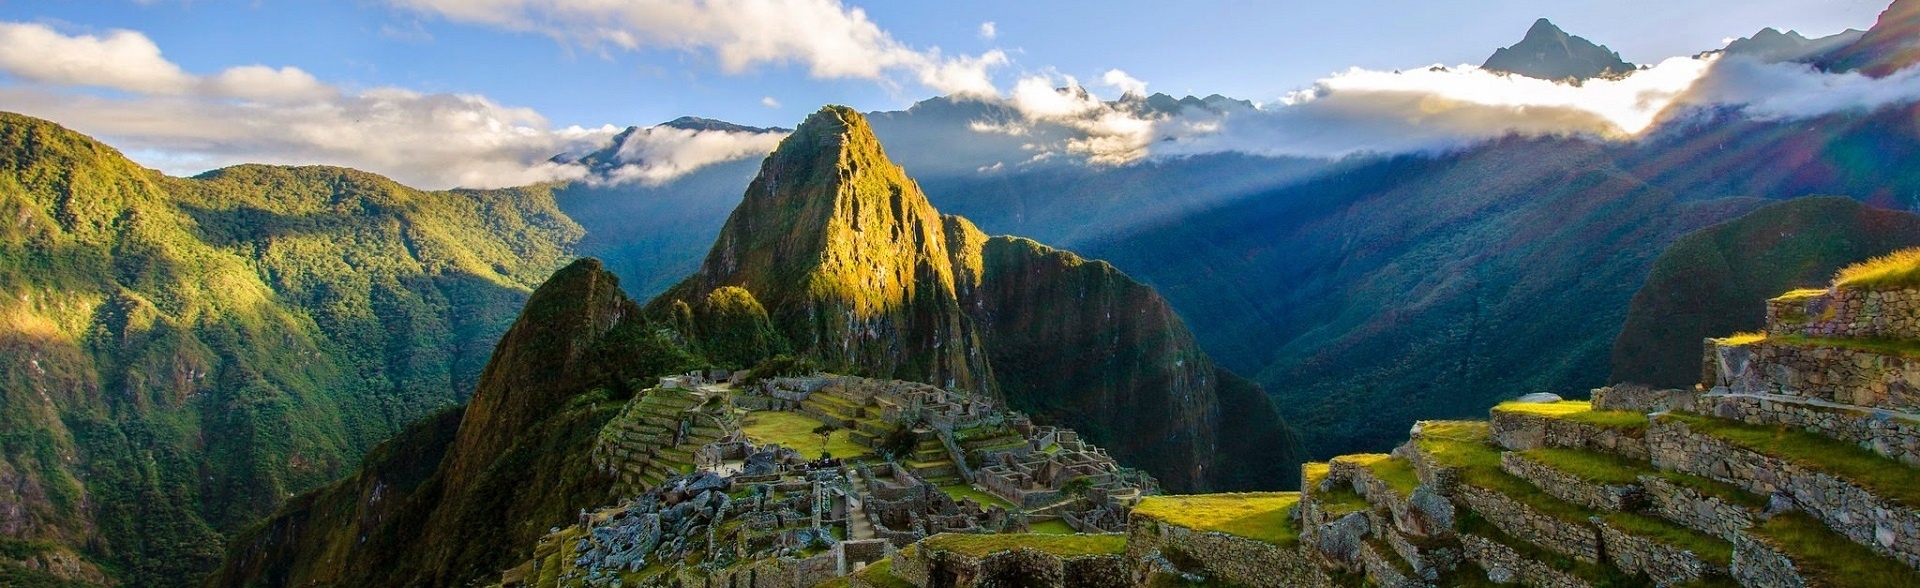 Explore beautiful landscapes and ancient cultures on this Peru Spiritual Tour with Amy Pattee Colvinn